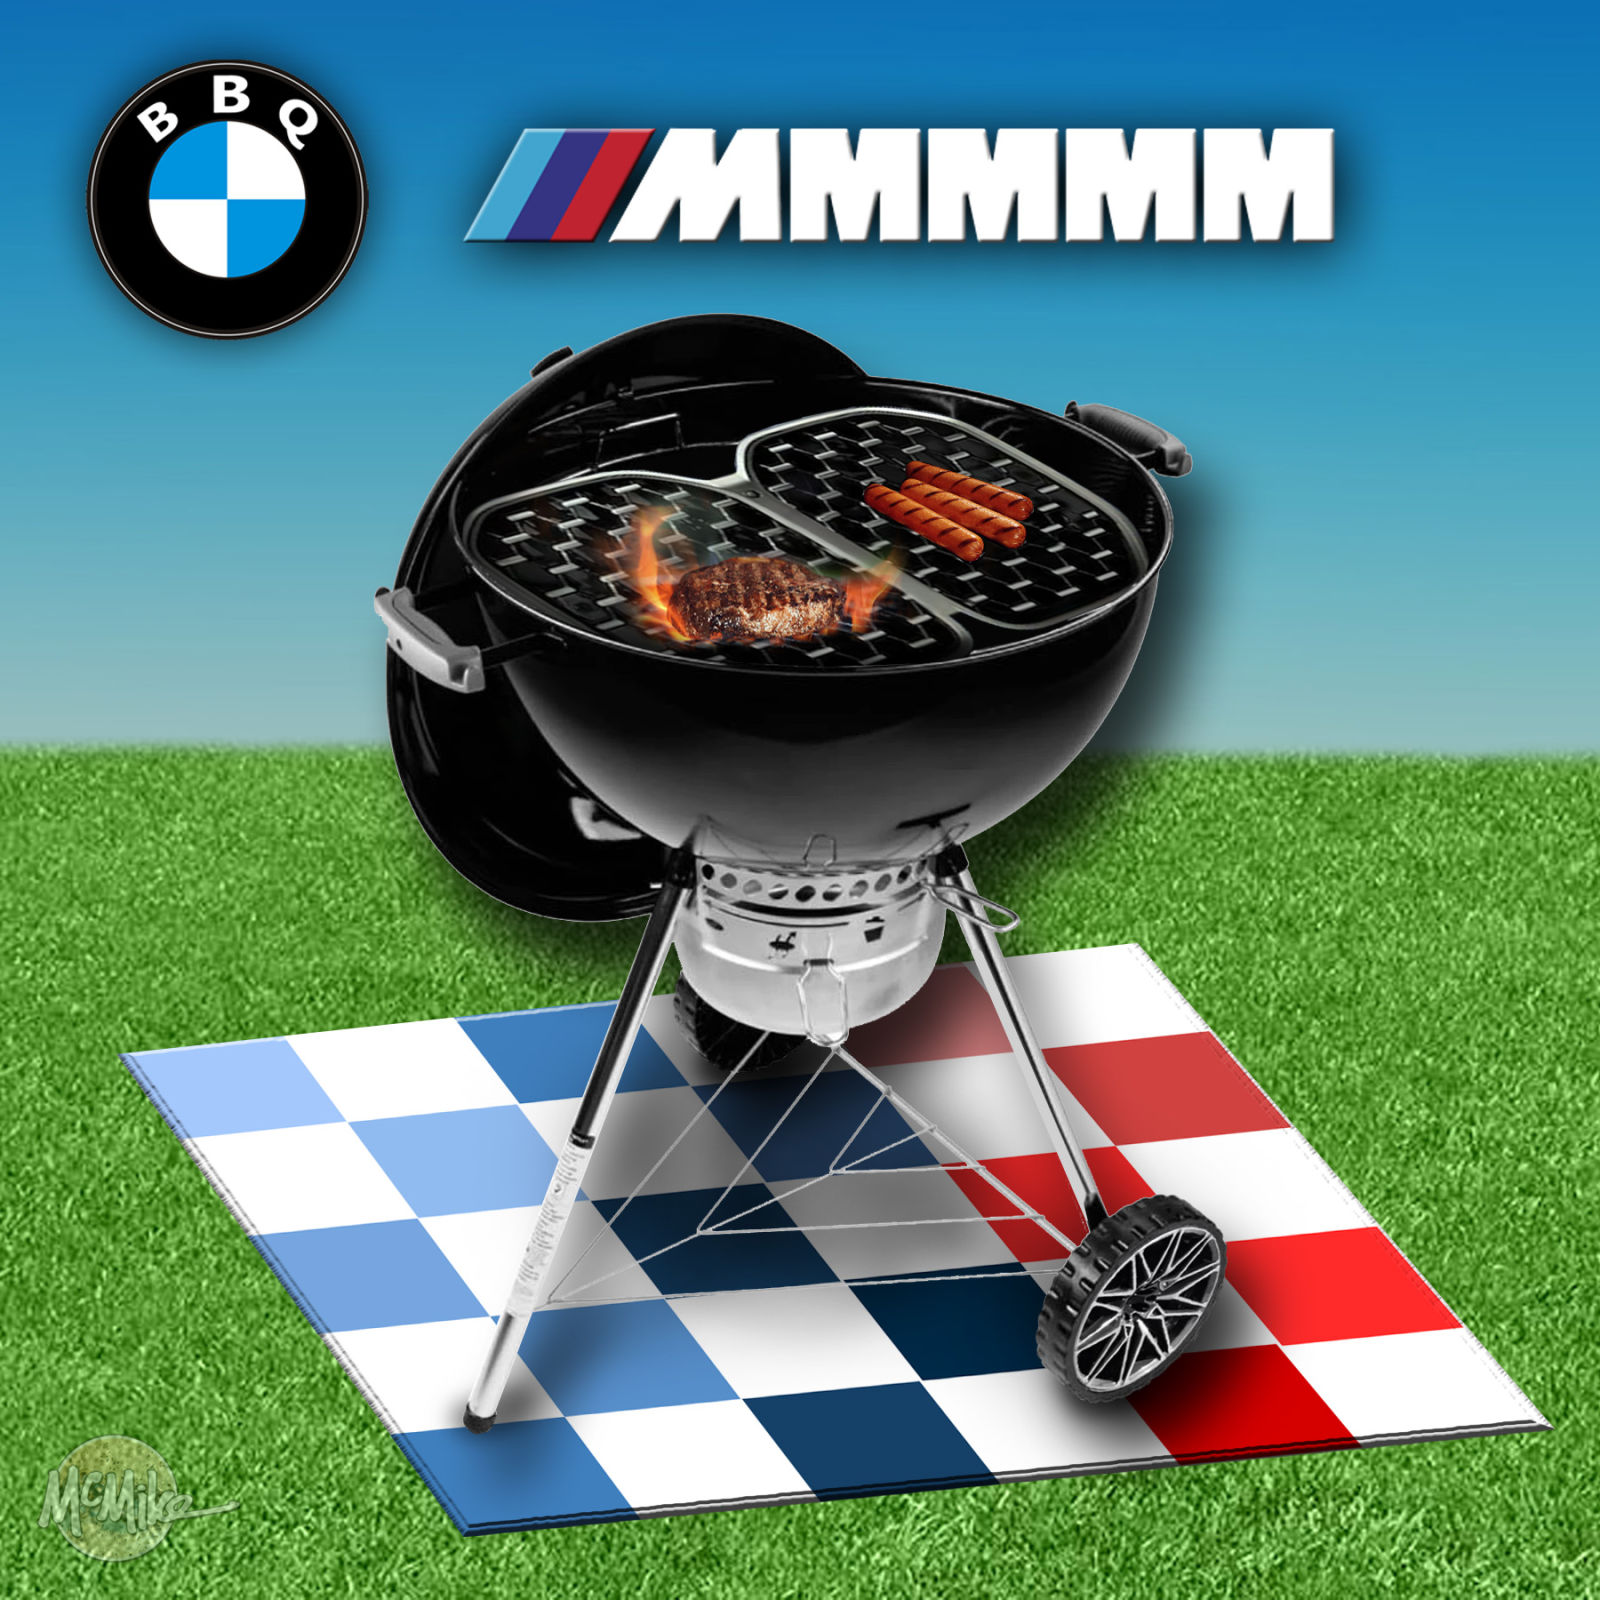 Illustration for article titled The Ultimate Grilling Machine™